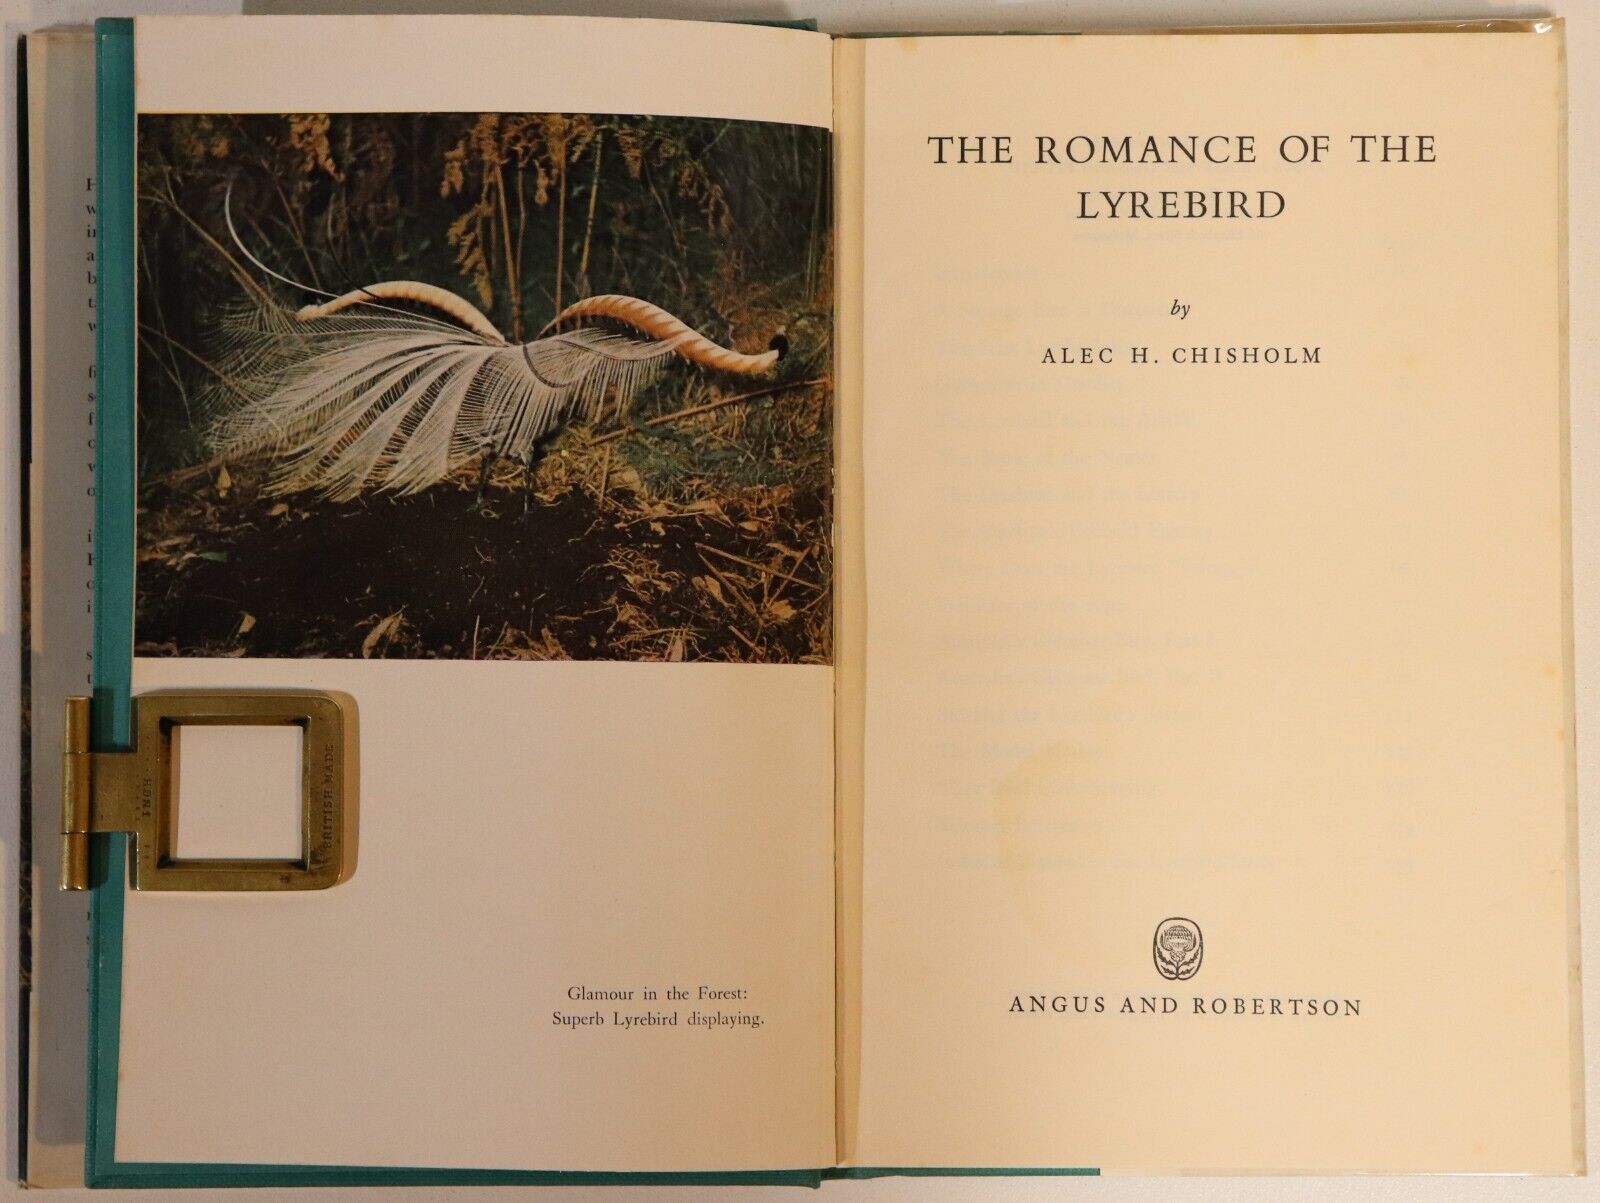 The Romance Of The Lyrebird: AC Chisholm - 1960 - 1st Ed. Natural History Book - 0